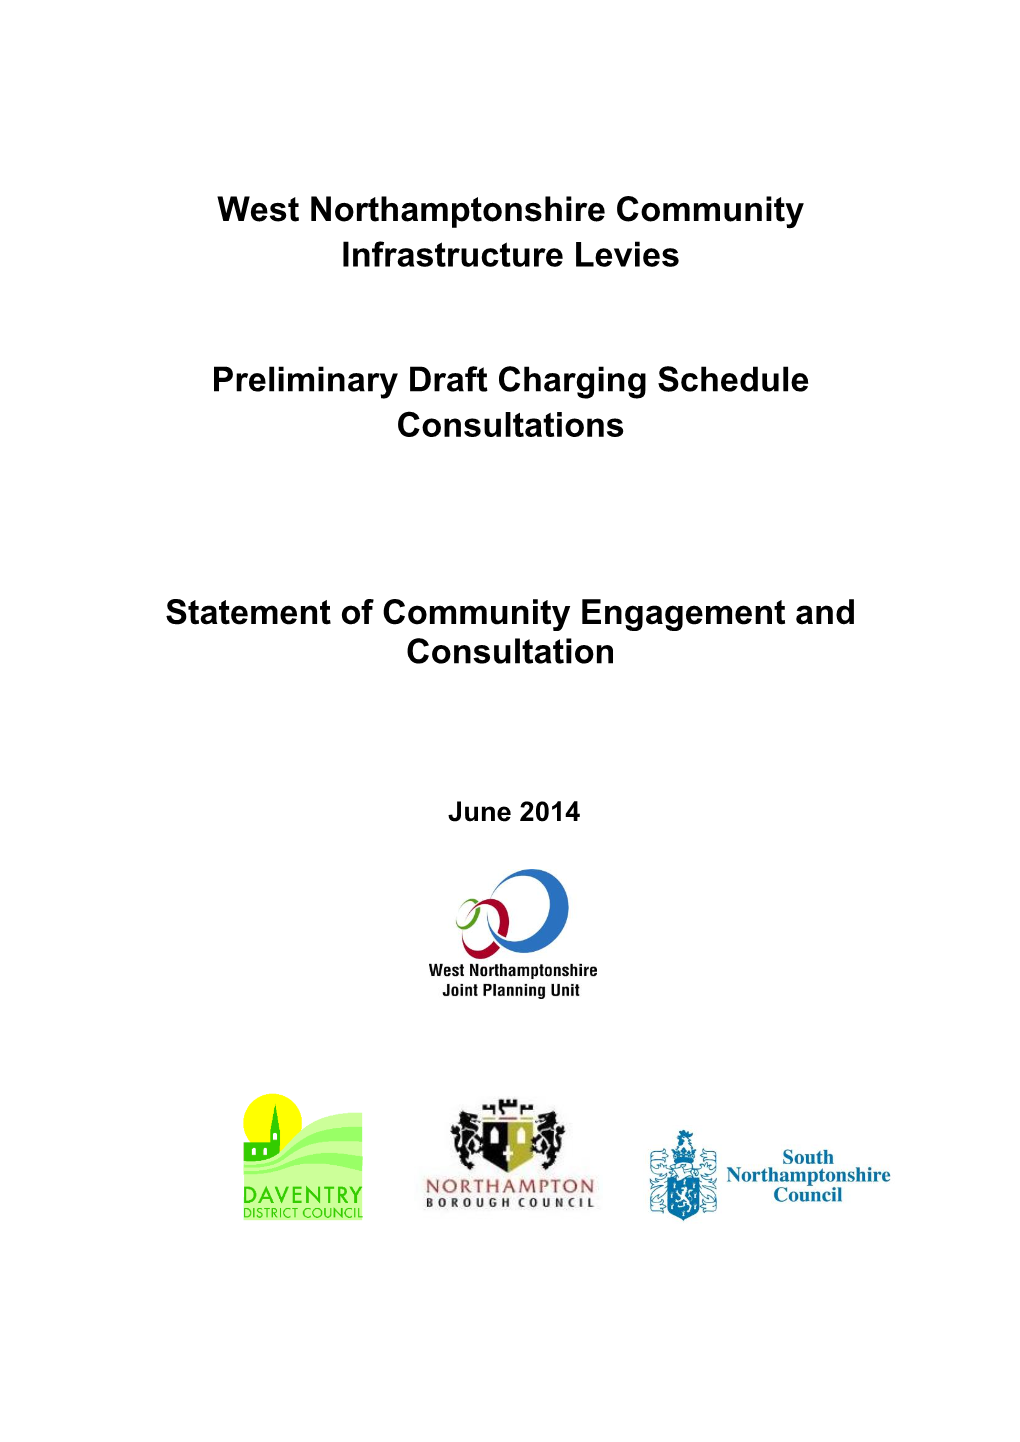 West Northamptonshire Community Infrastructure Levies Preliminary Draft Charging Schedule Consultations Statement of Community